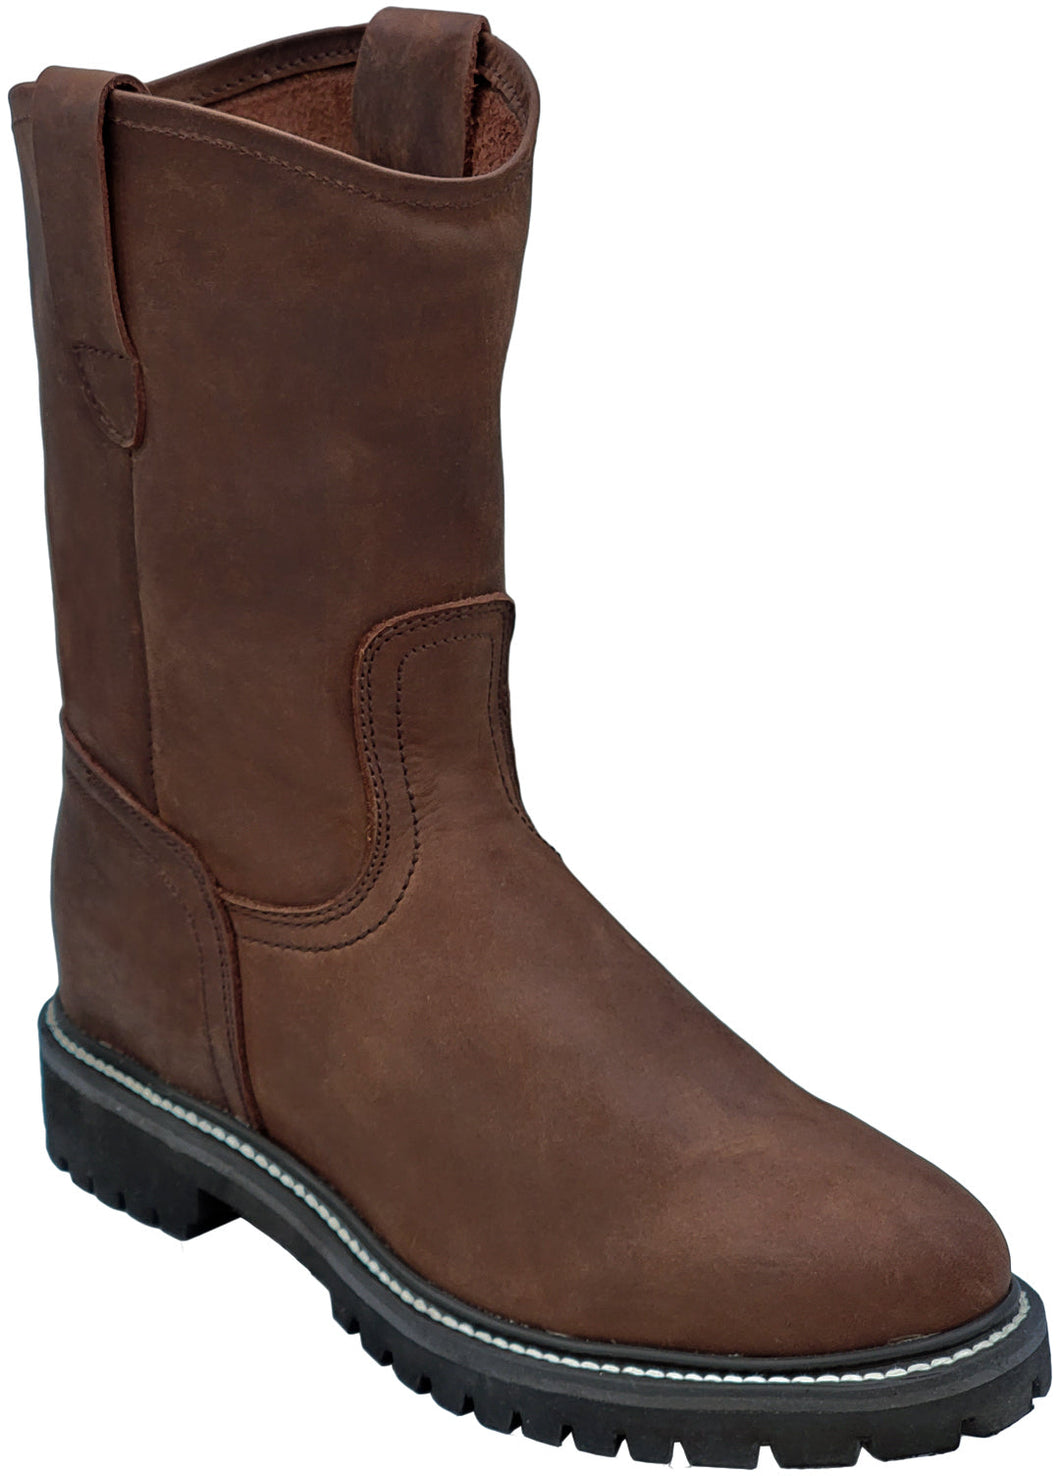 Silverton Sierra All Leather Round Toe Work Boots (Brown)